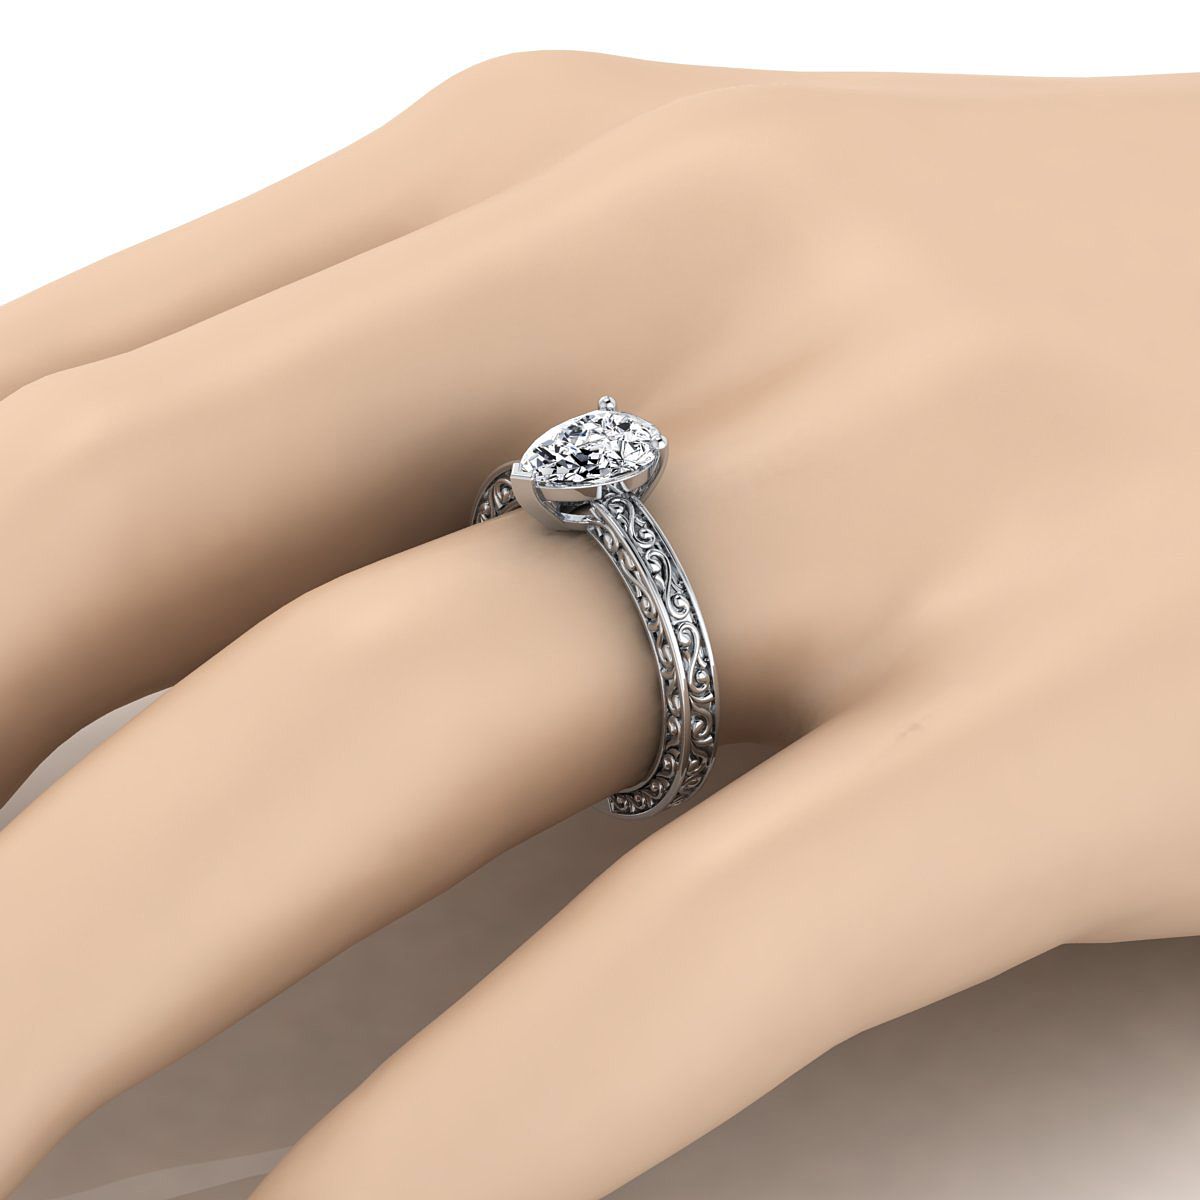 18K White Gold Pear Shape Center Hand Engraved Scroll Vintage Solitaire Engagement Ring